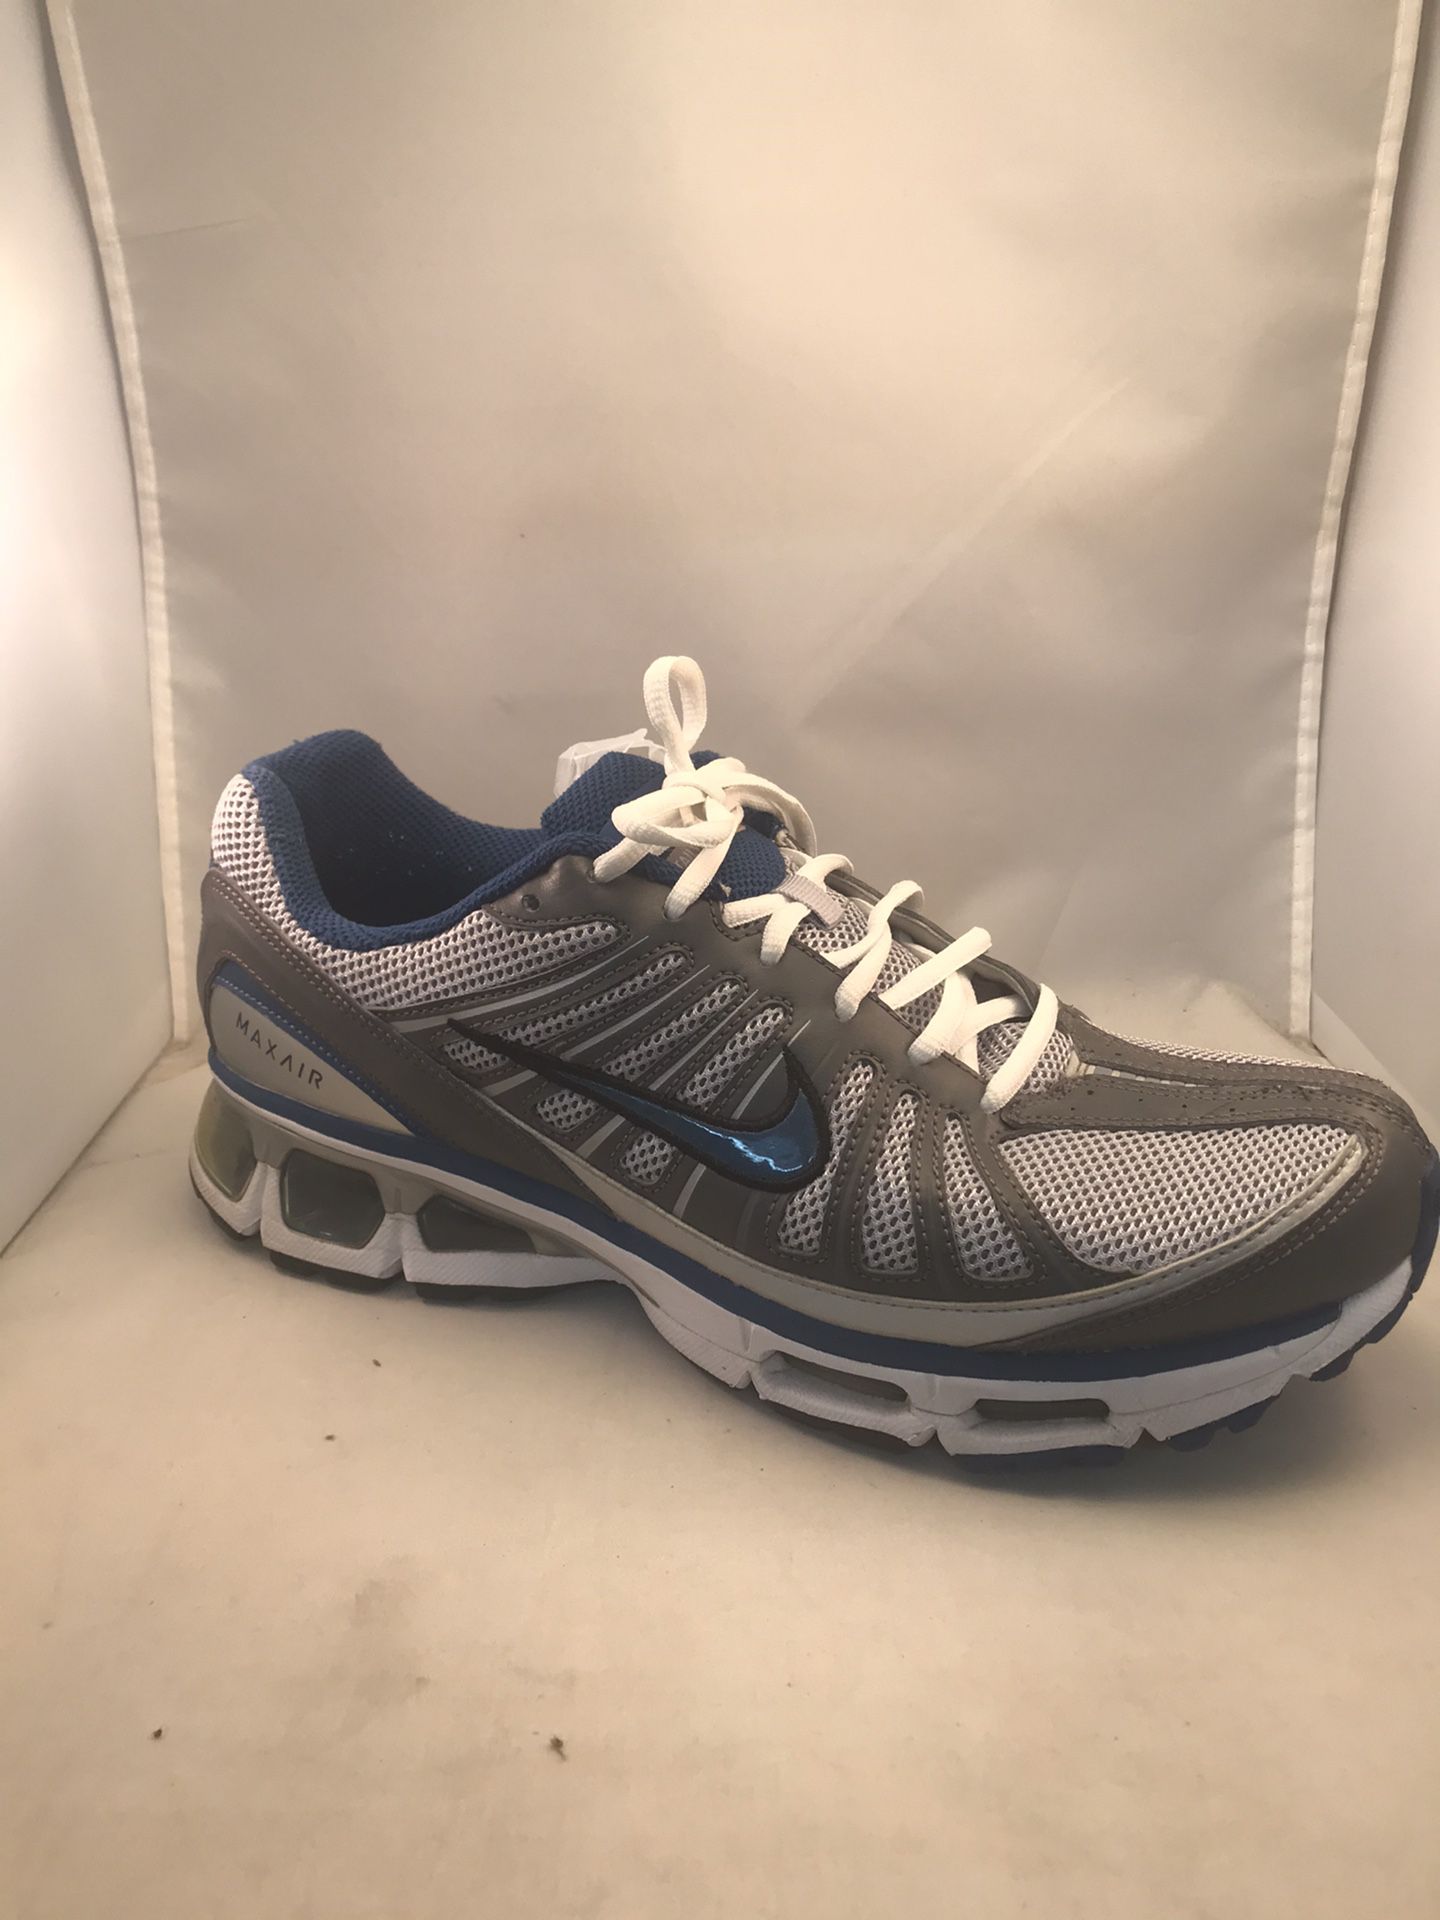 Nike Air Max Tailwind Running shoes